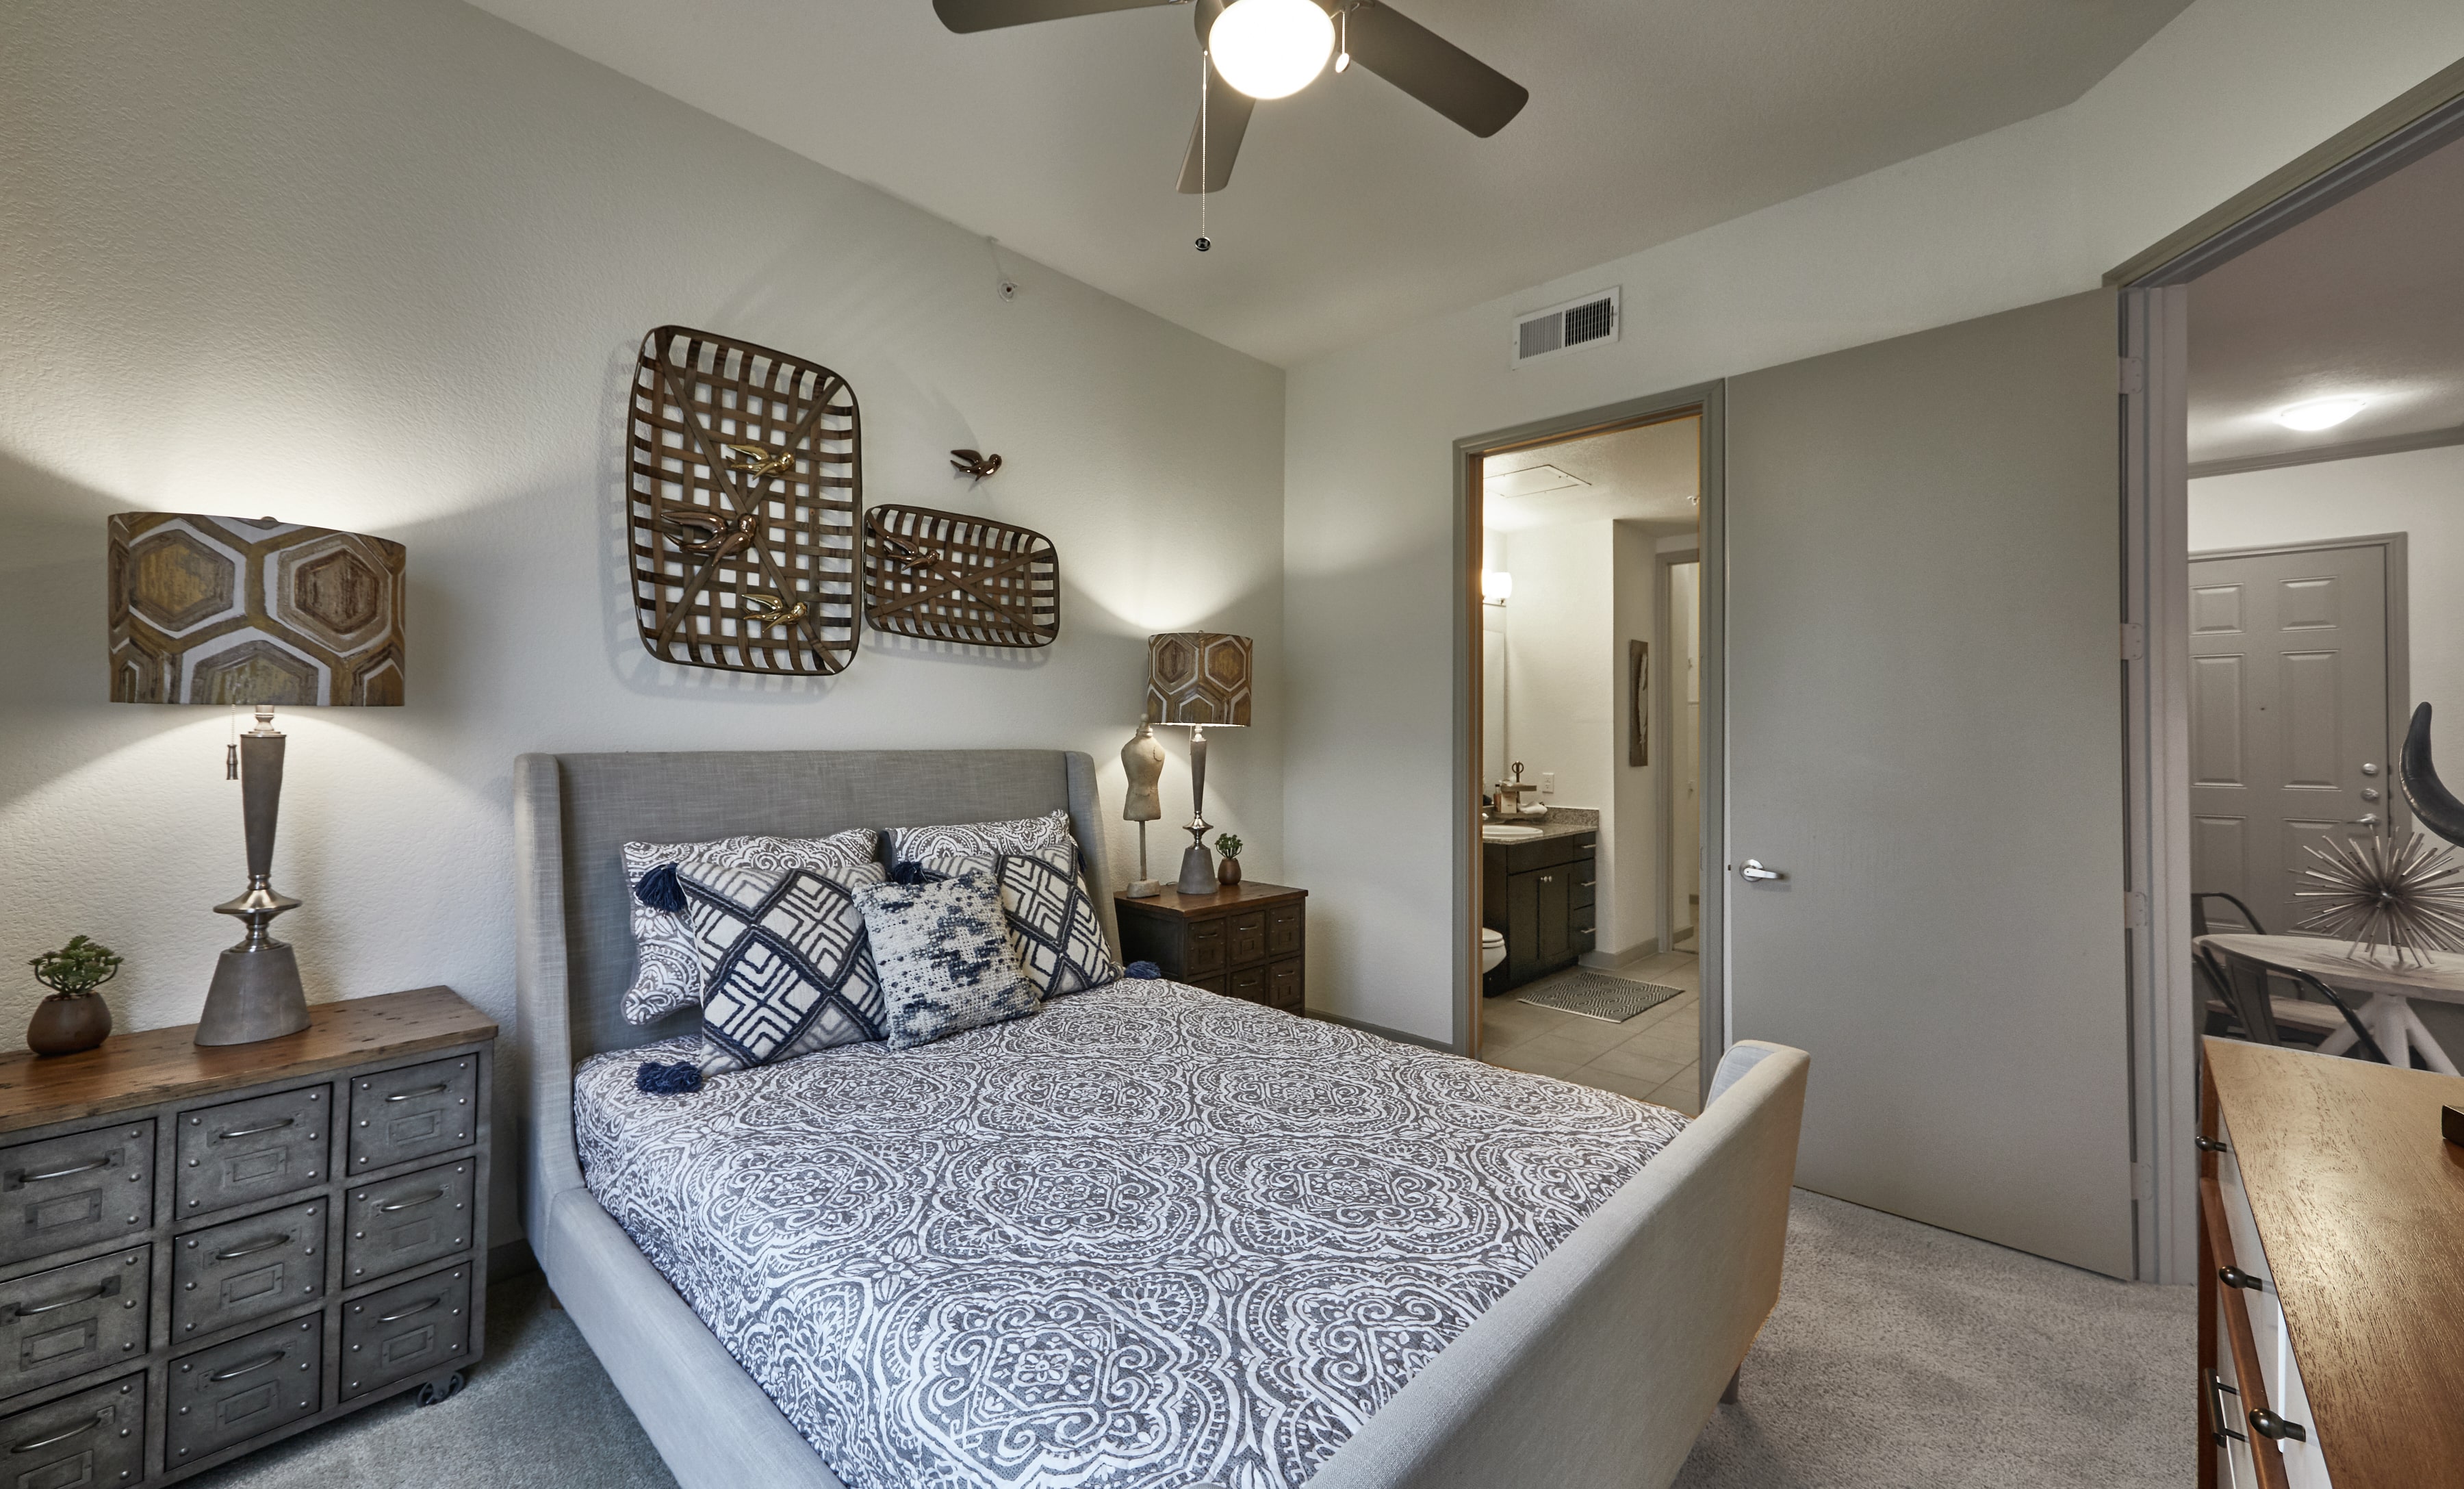 Primary bedroom suite with a grey fabric bed, nightstands, and a ceiling fan